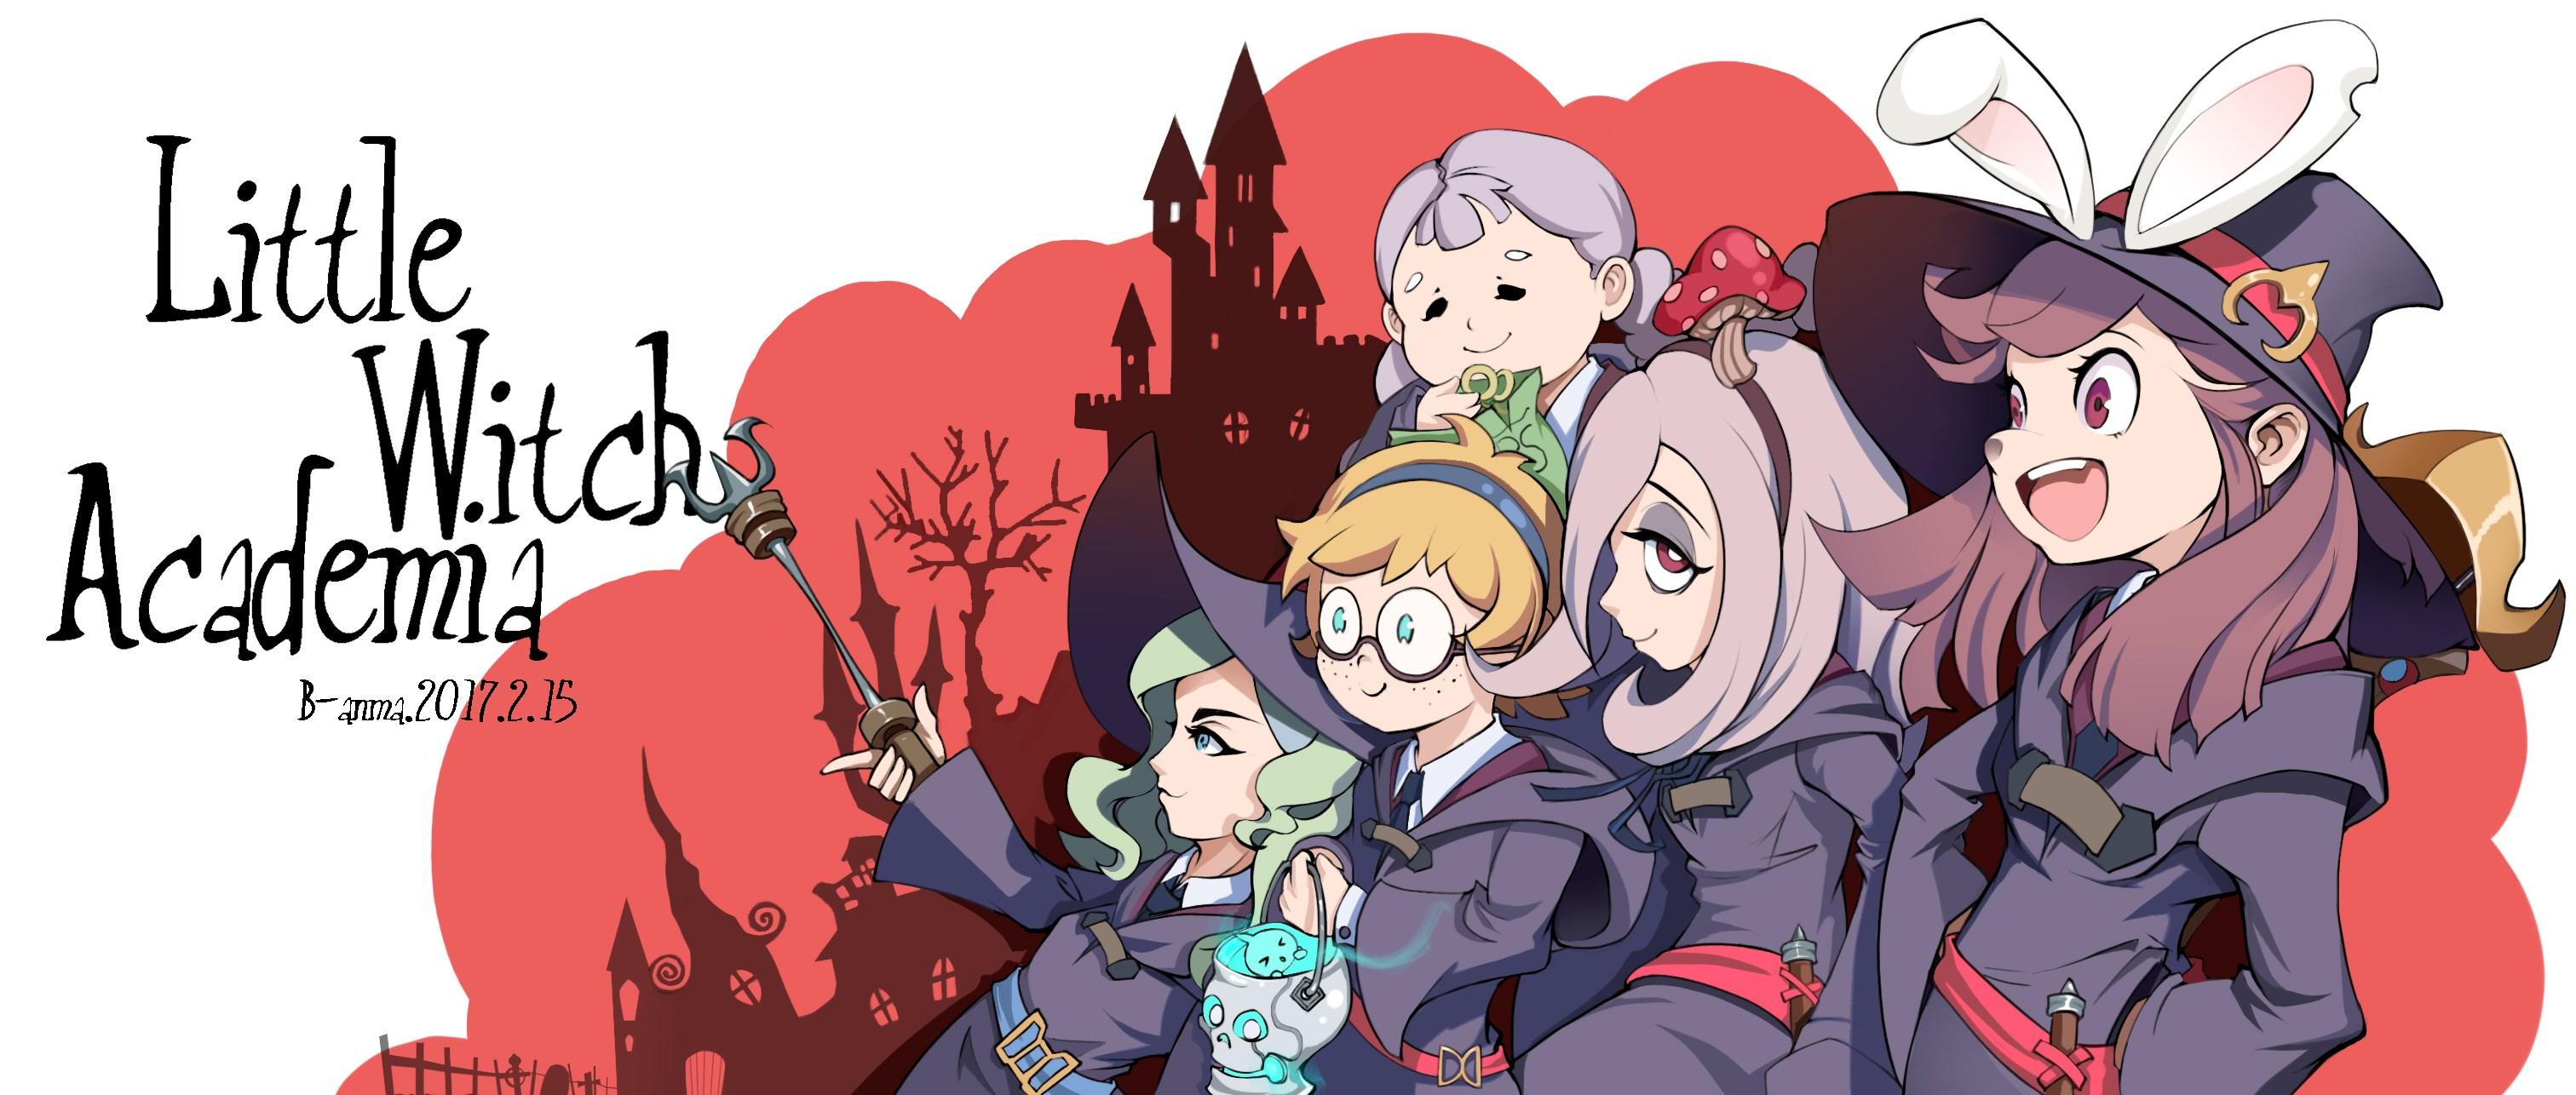 little witch academia for desktop HD 3024x1286. Anime